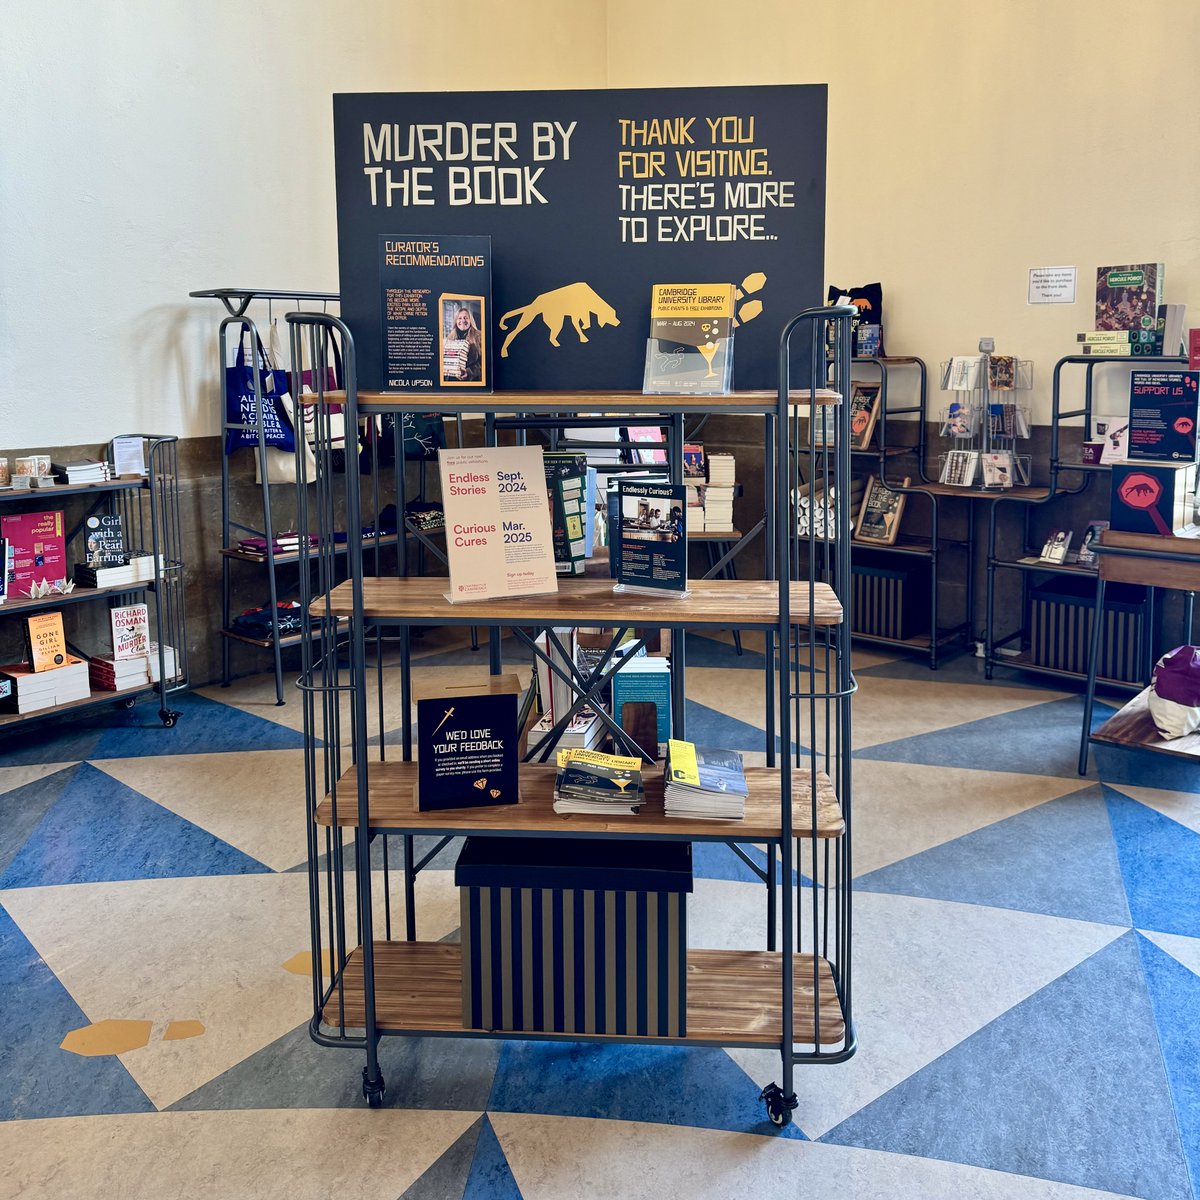 New merch alert! The Cambridge University Library shop has got a brilliant selection of crime-inspired books and gifts. We’ve got Murder by the Book exhibition tote bags, Agatha Christie-themed gifts and a wonderful selection of crime fiction. #MurderbytheBook